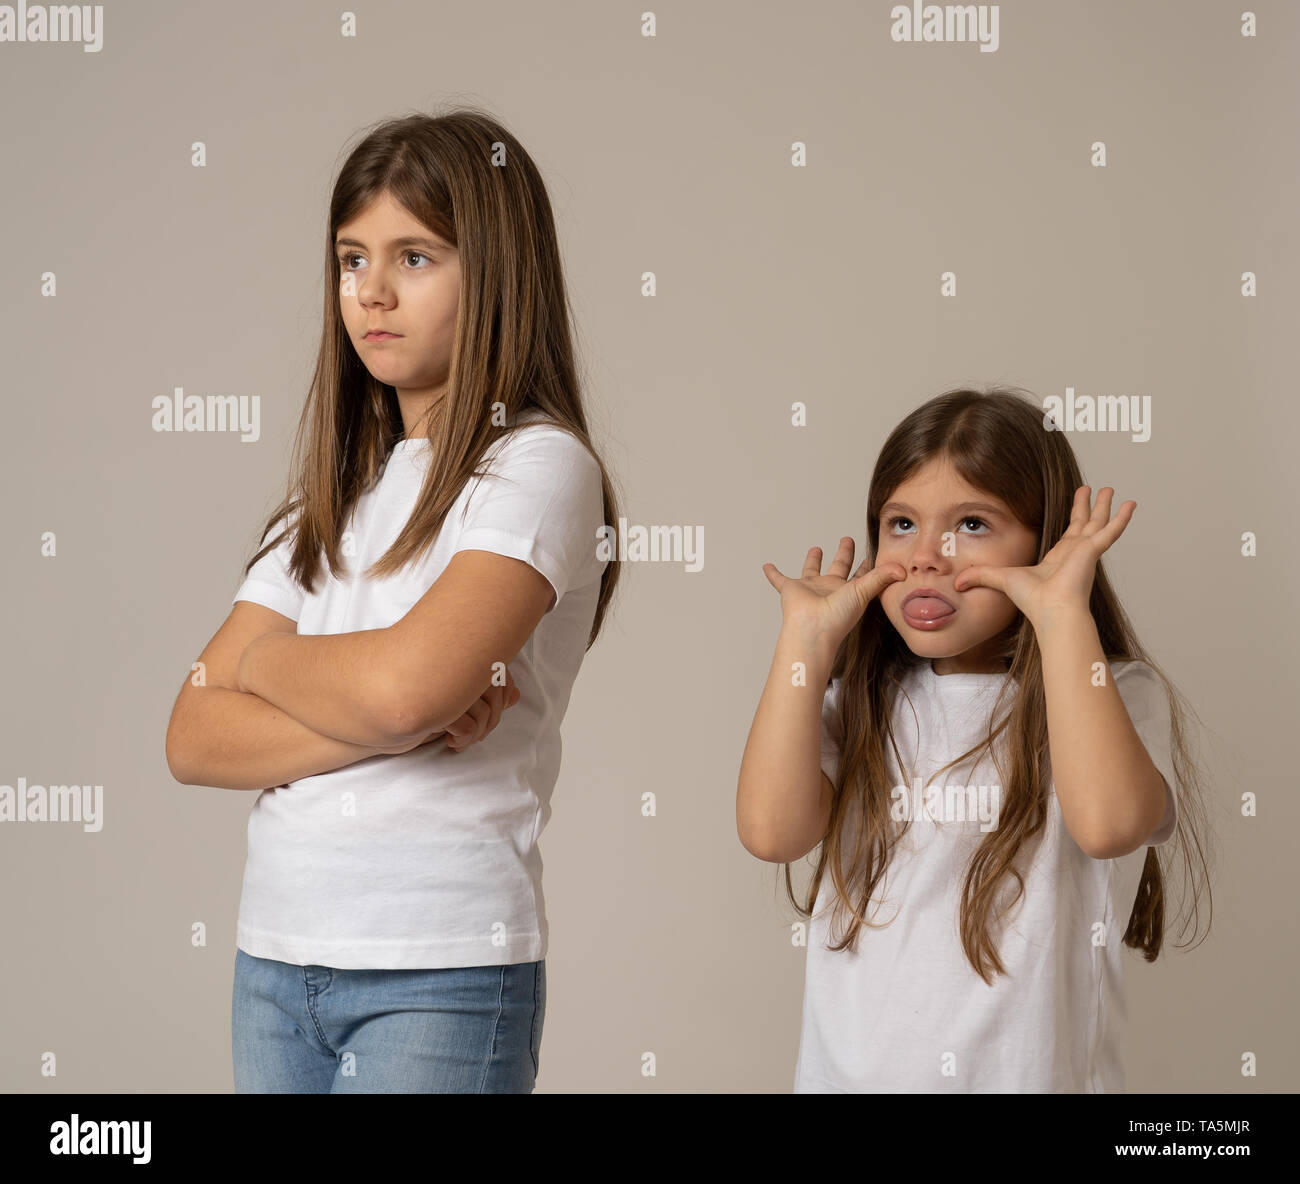 Portrait of siblings interacting having an argument. young sister sticking tongue out and making funny faces to her angry sad older sister not talking Stock Photo